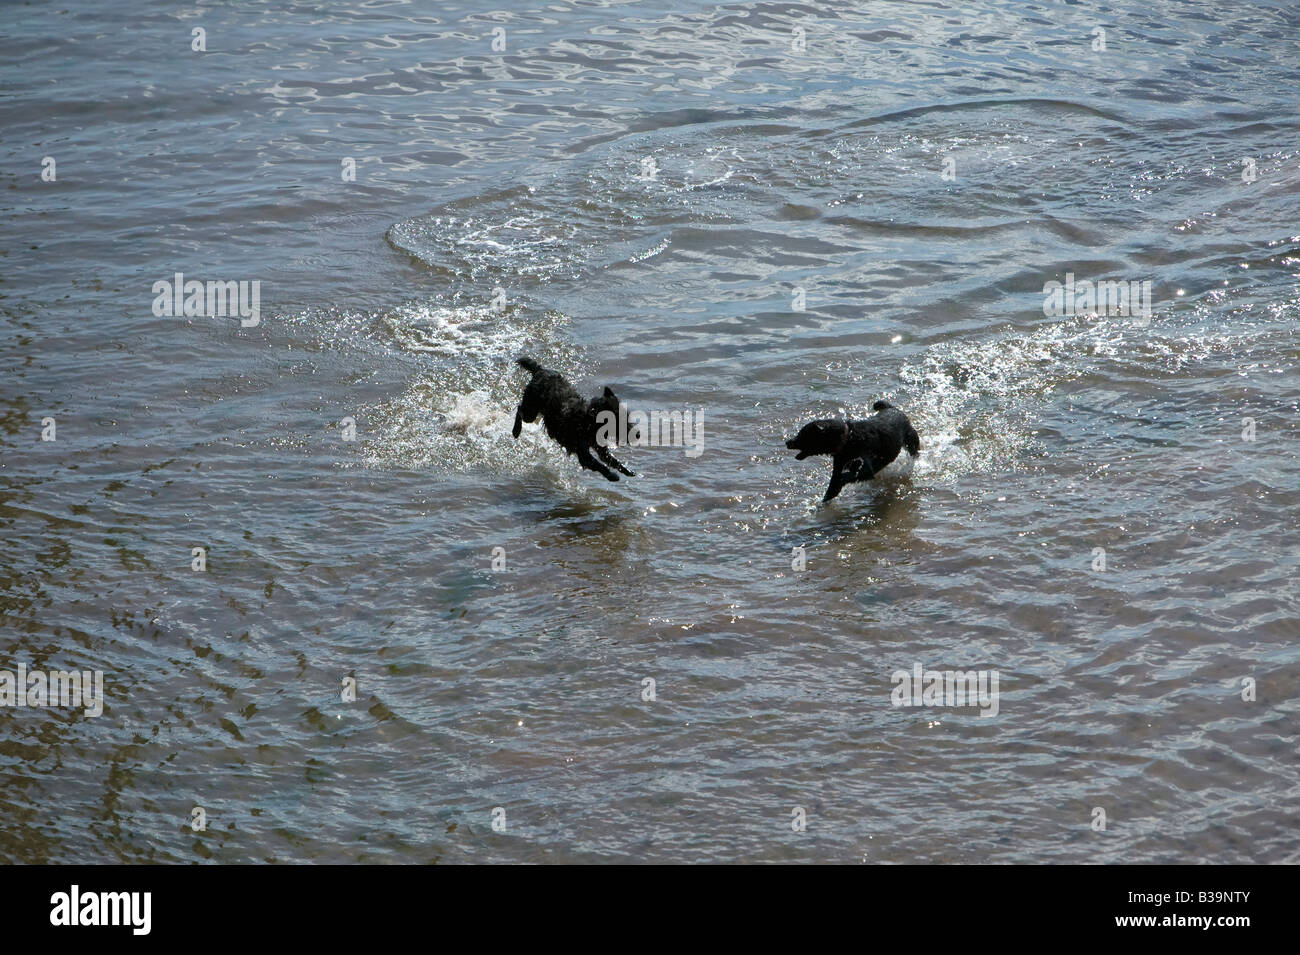 Two small black dogs run through shallow water on a beach at Torquay Stock Photo